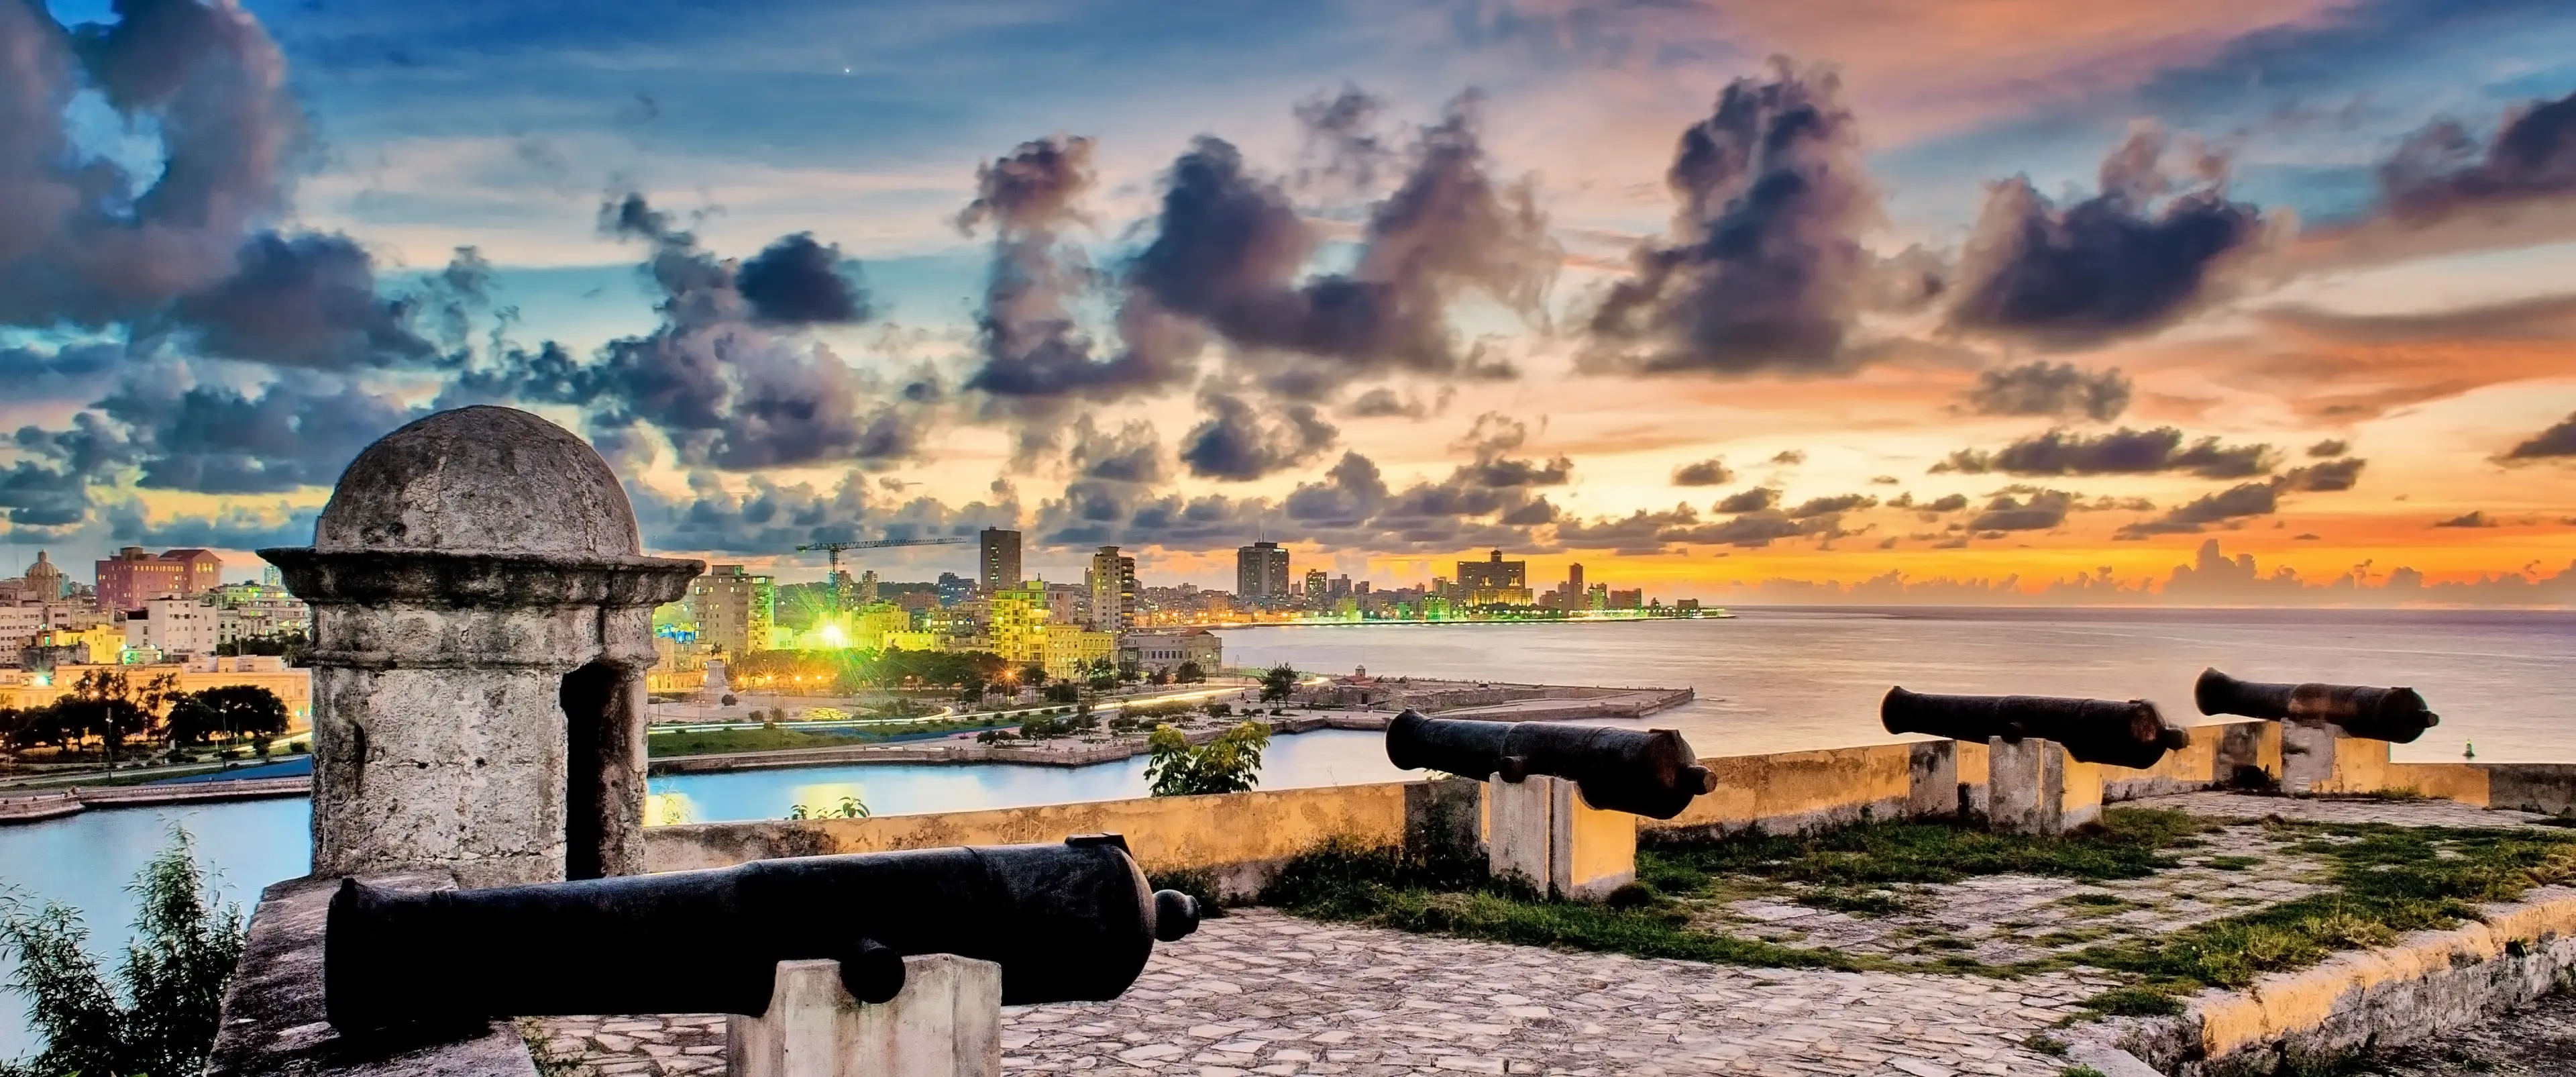 View of the city from the castle of the Three Kings of El Morro